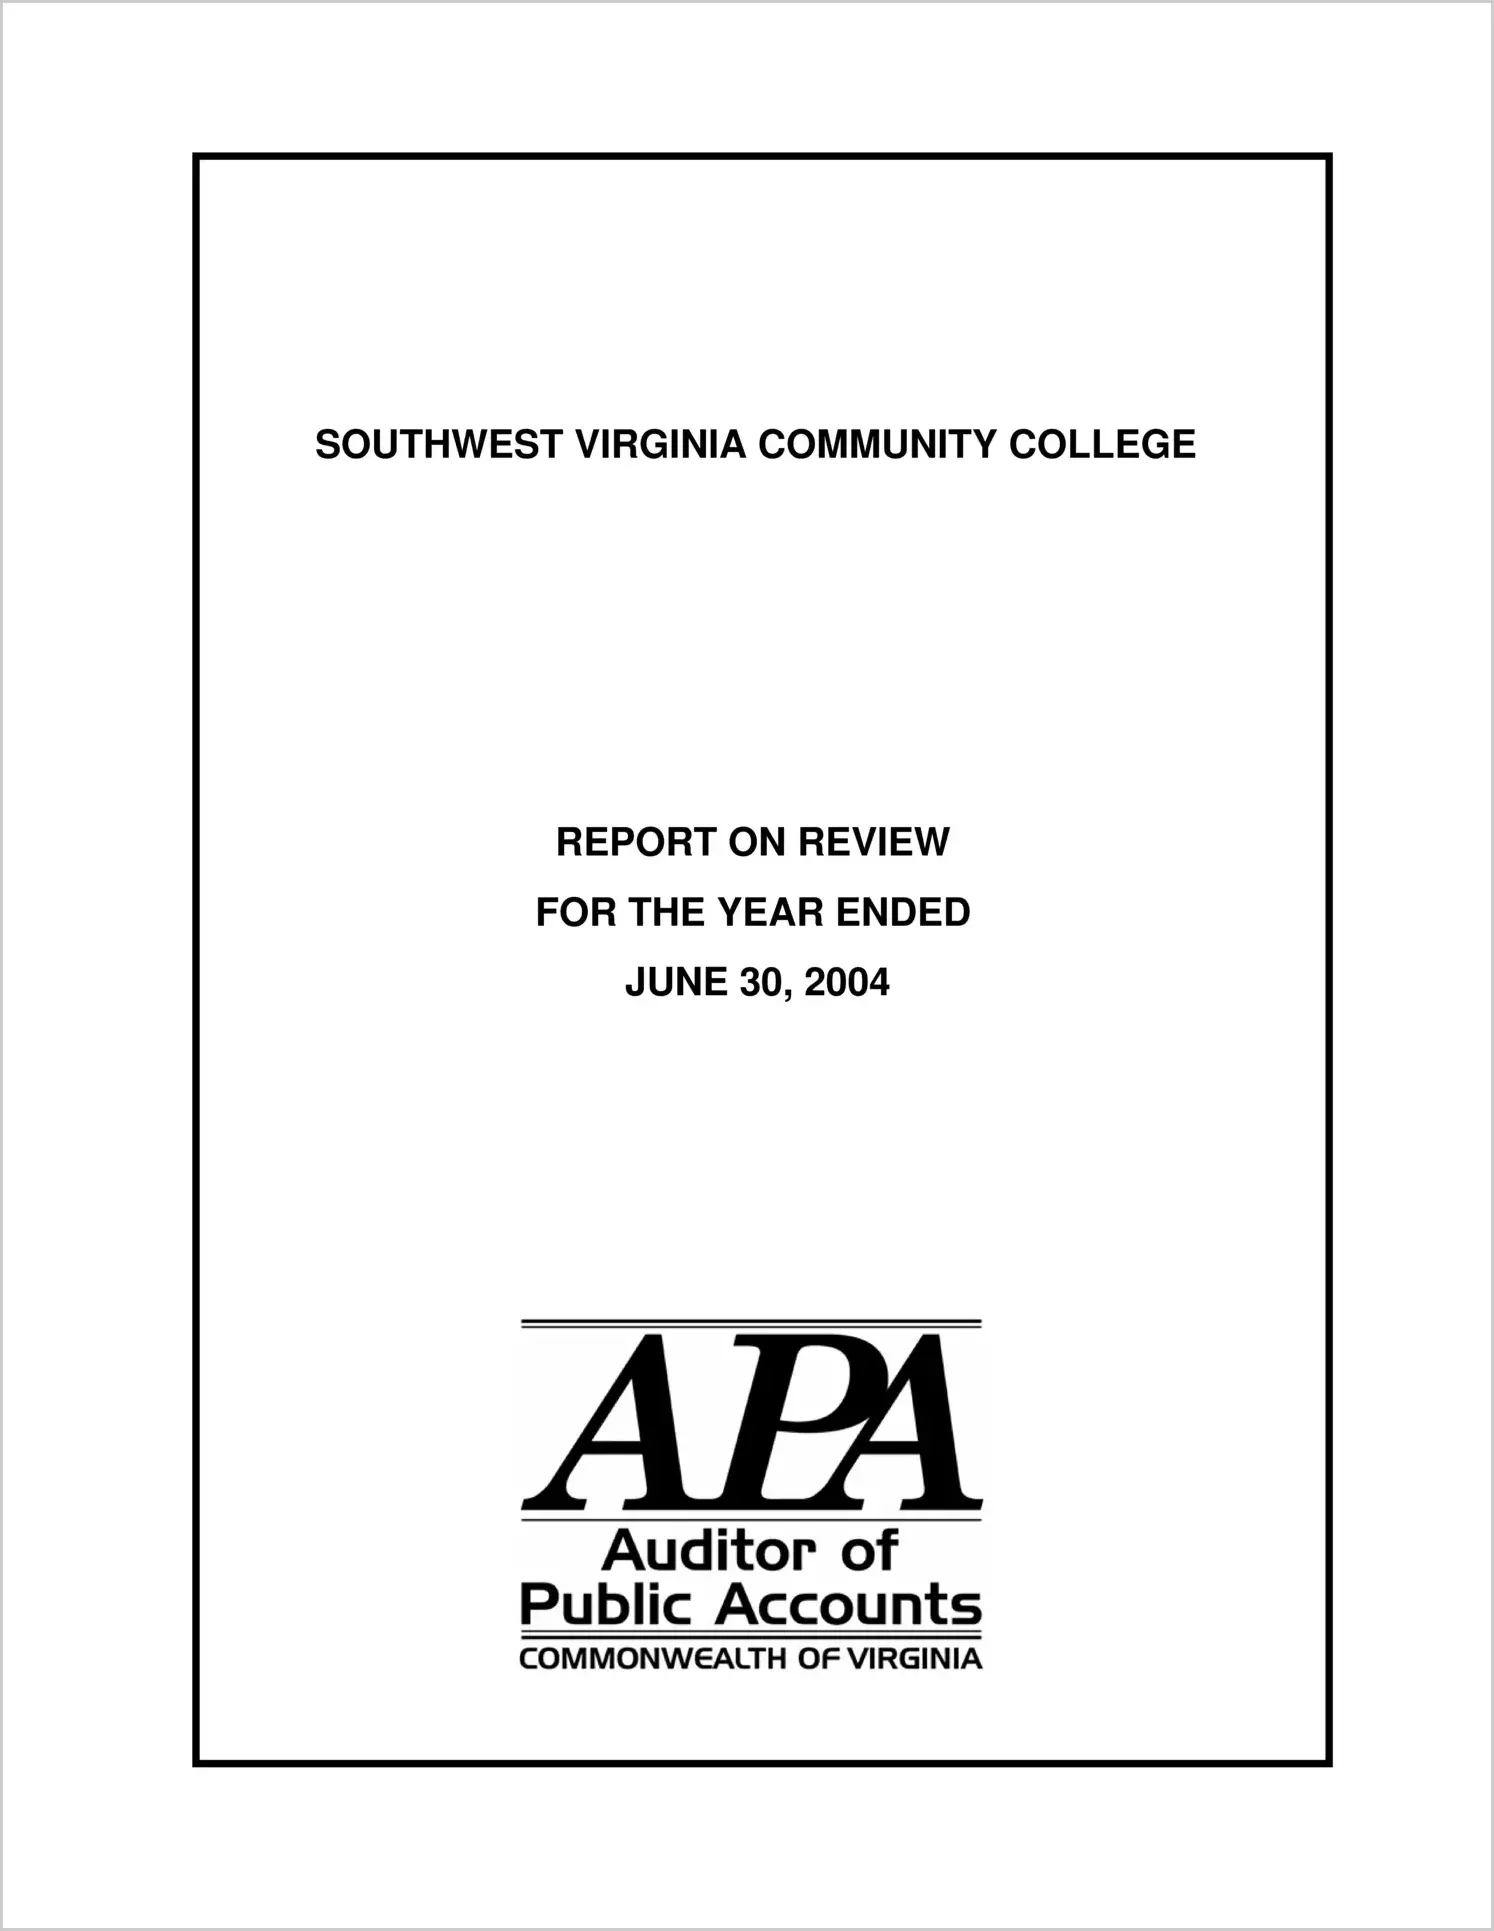 Suothwest Virginia Community College Report on review for the year ended June 30, 2004